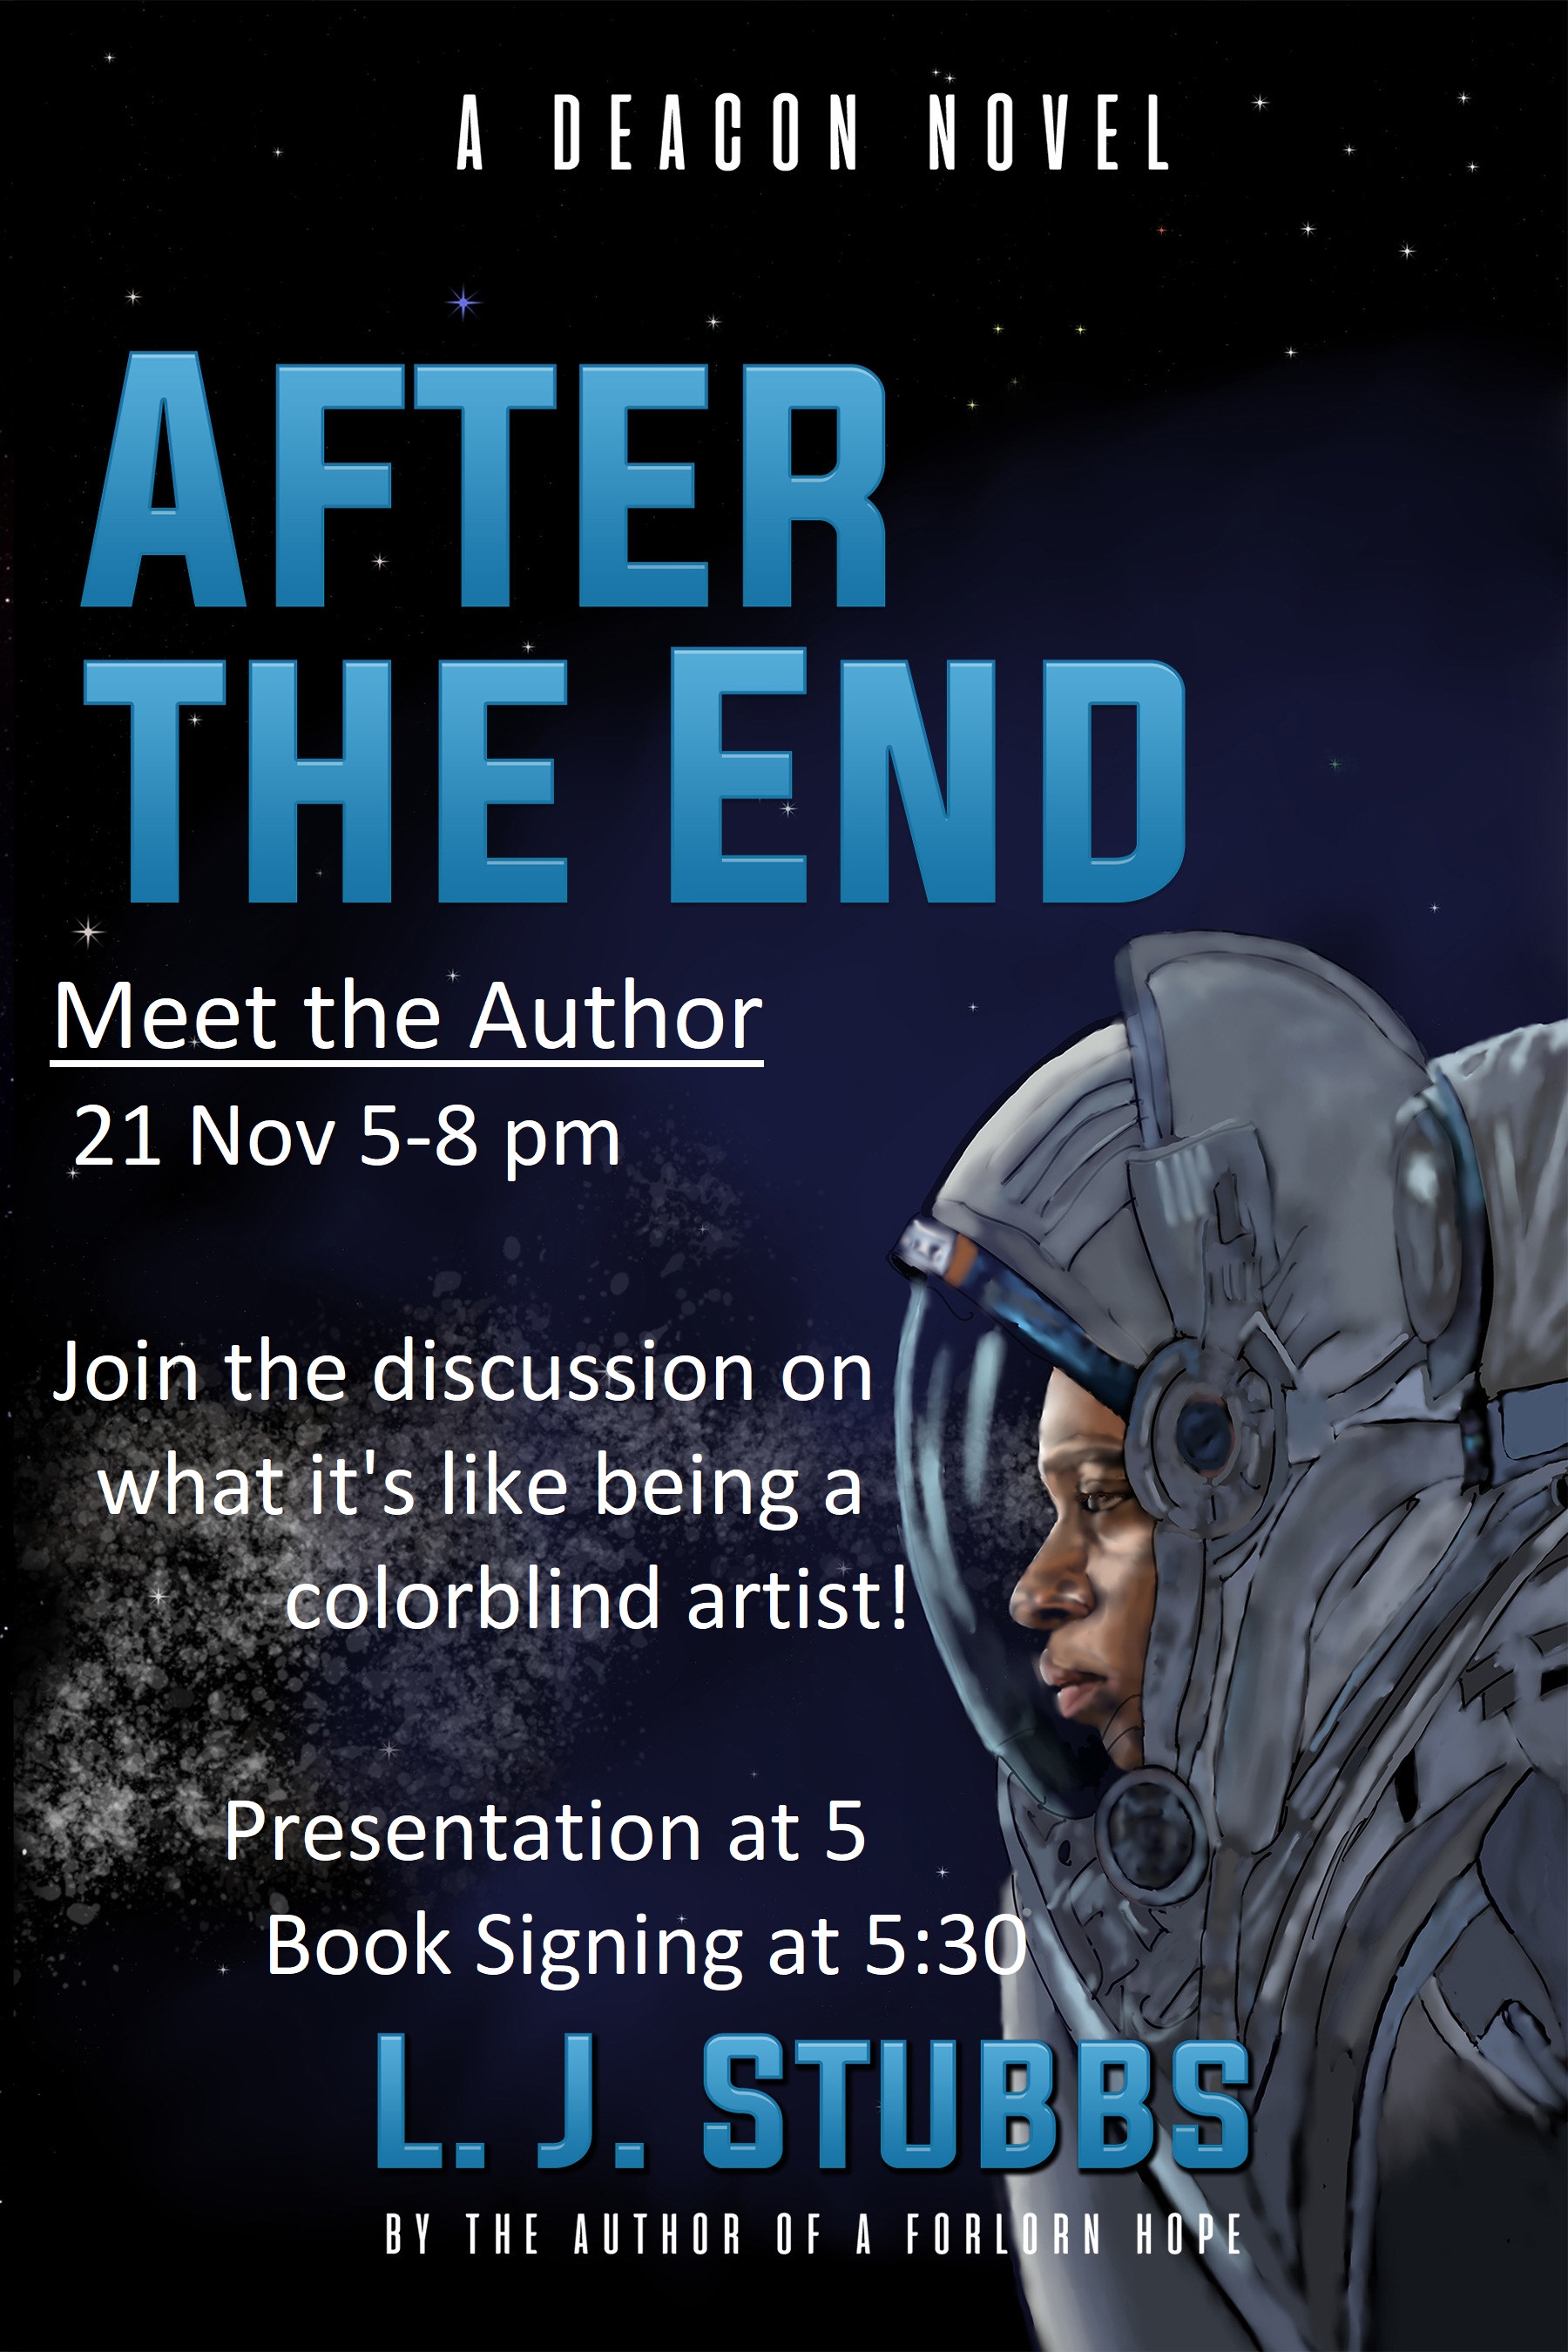 Starry background, forlorn astronaut, blue and white text: "A Deacon Novel | After the End | Meet the Author 21 Nov 5-8 pm | Join the discussion on what its like being a colorblind artist! | Presentation at 5 | Book Signing at 5:30 | L. J. Stubbs | by the author of A Forlorn Hope"